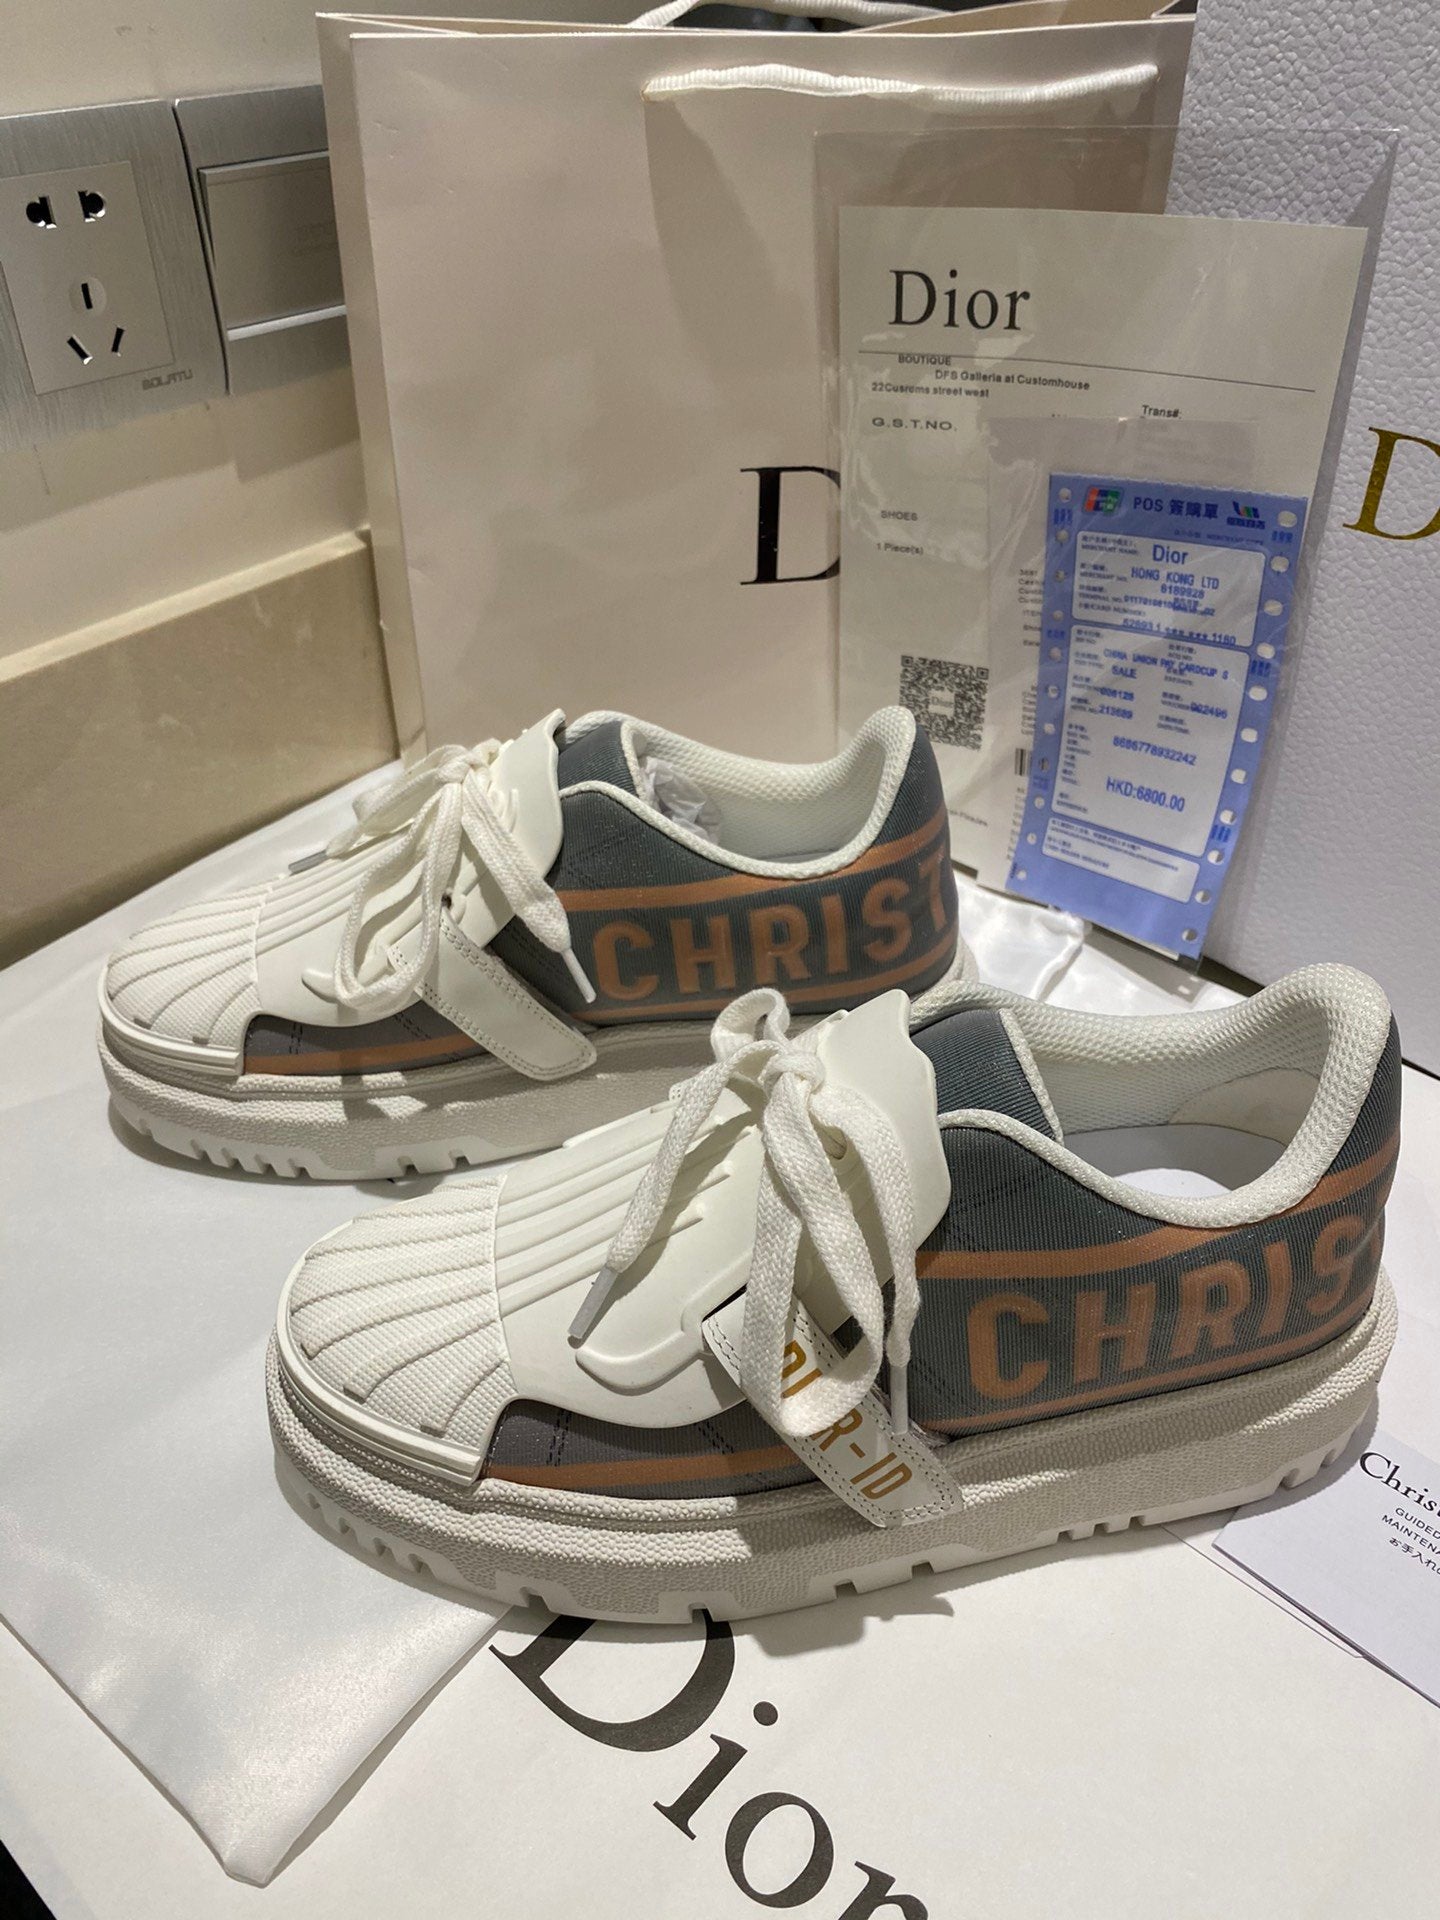 Dior Women's 2021 NEW ARRIVALS Dior-id Sneakers Shoes